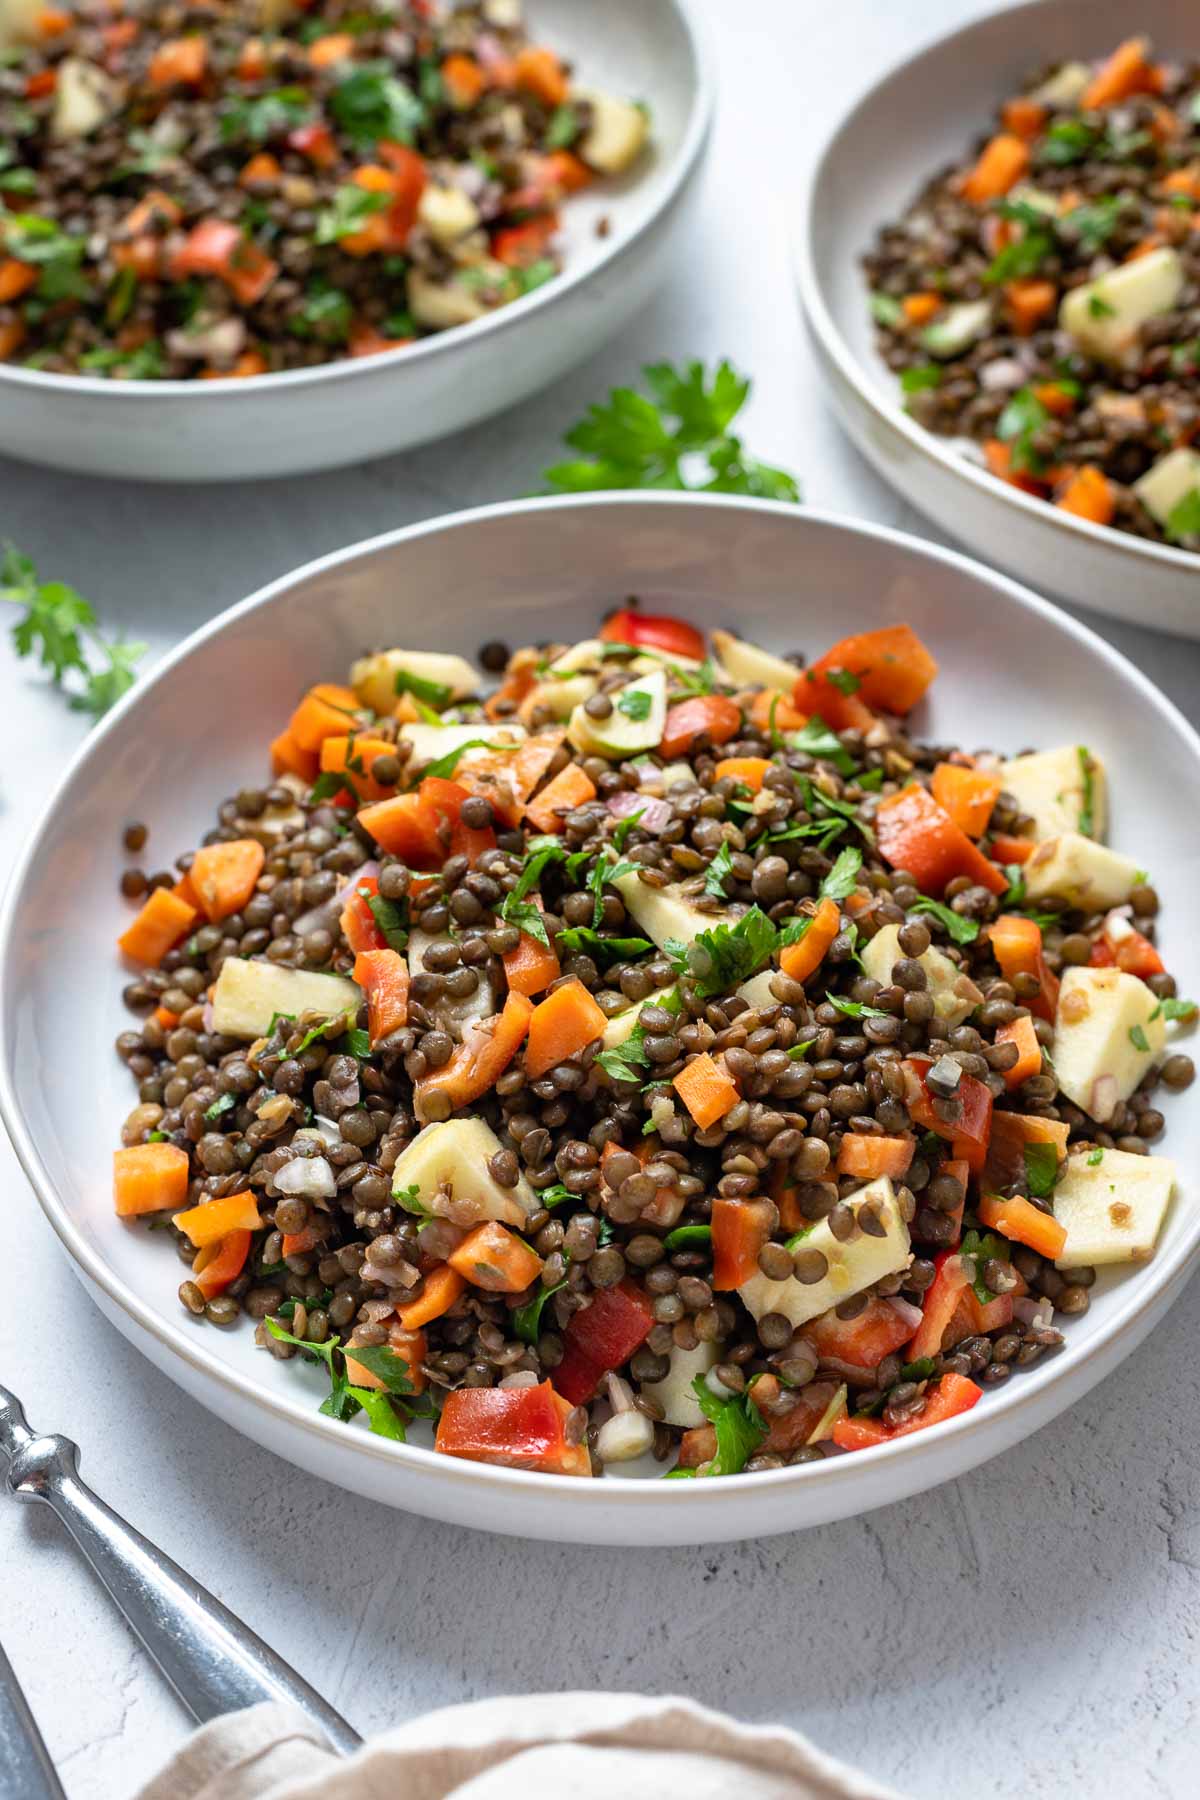 Lentil Salad with Apple & Carrot Recipe